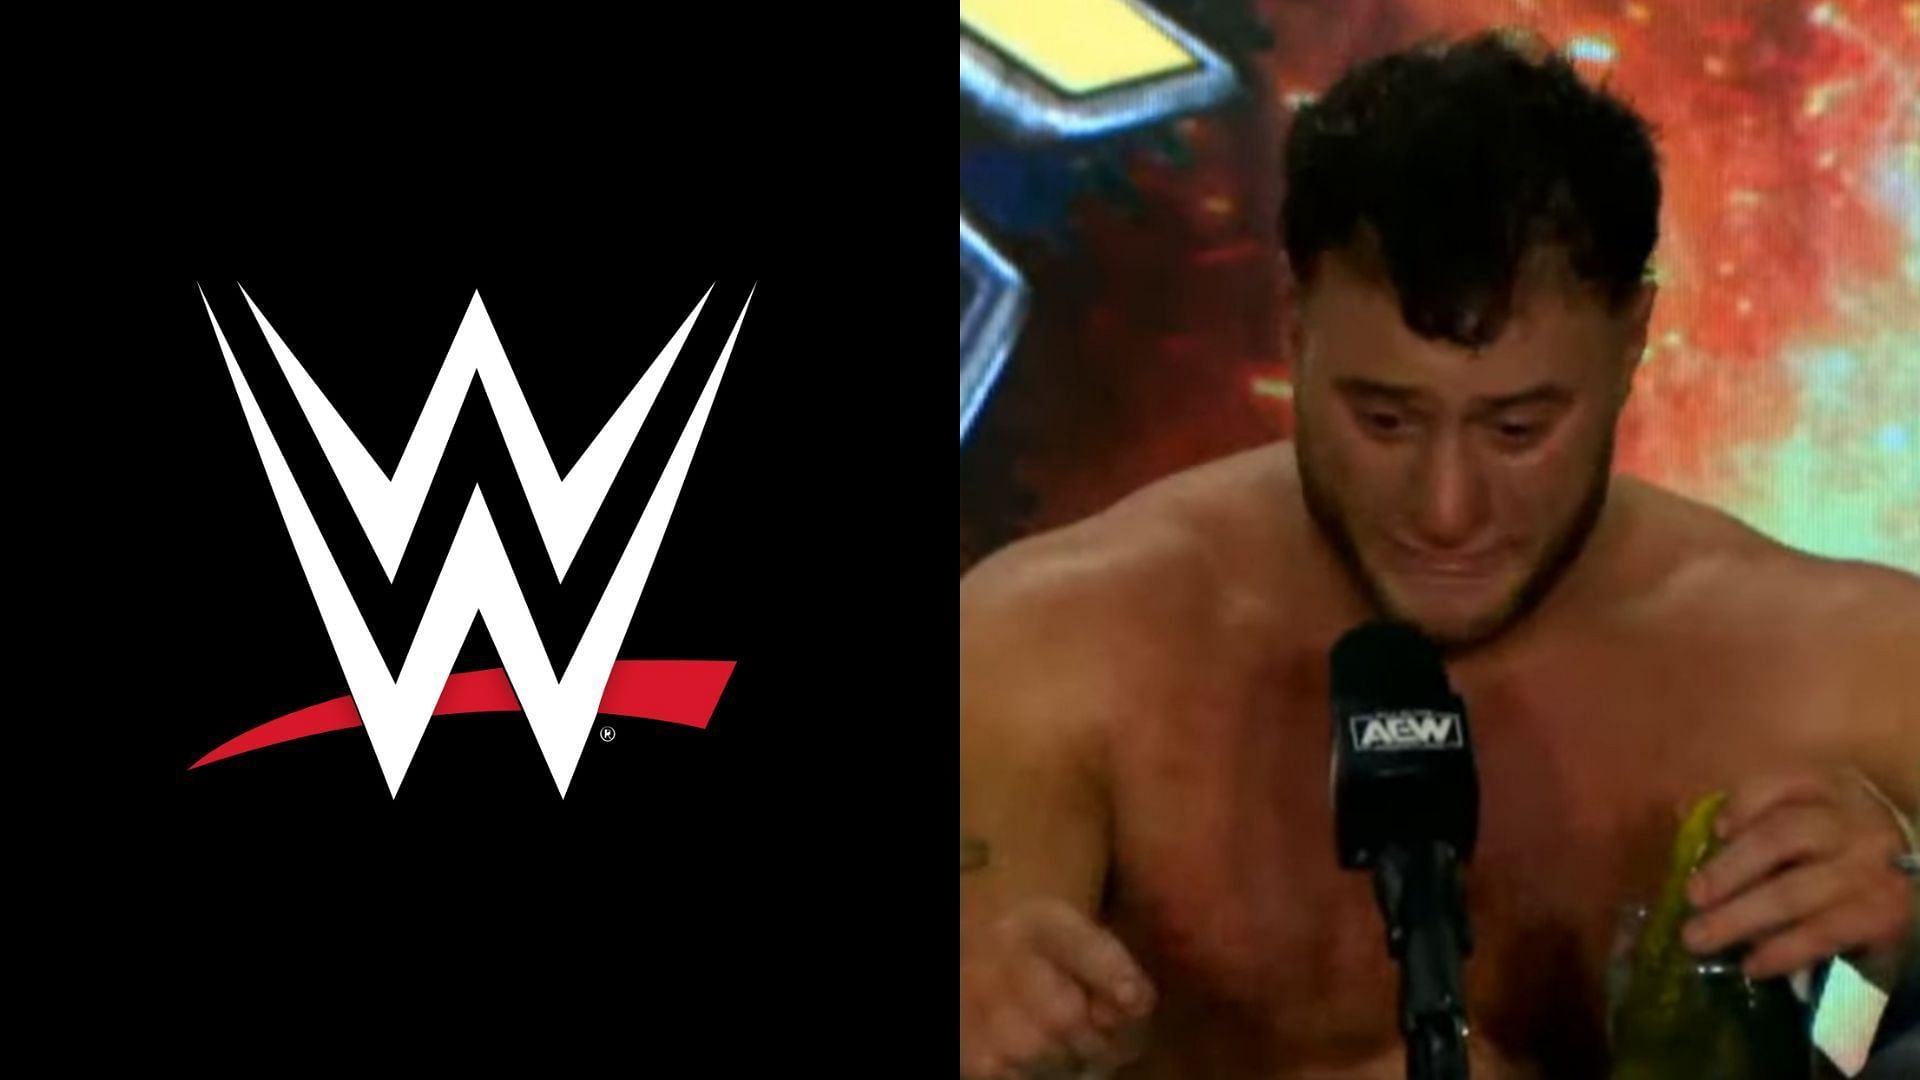 MJF was emotional during his interview at the media scrum for Full Gear